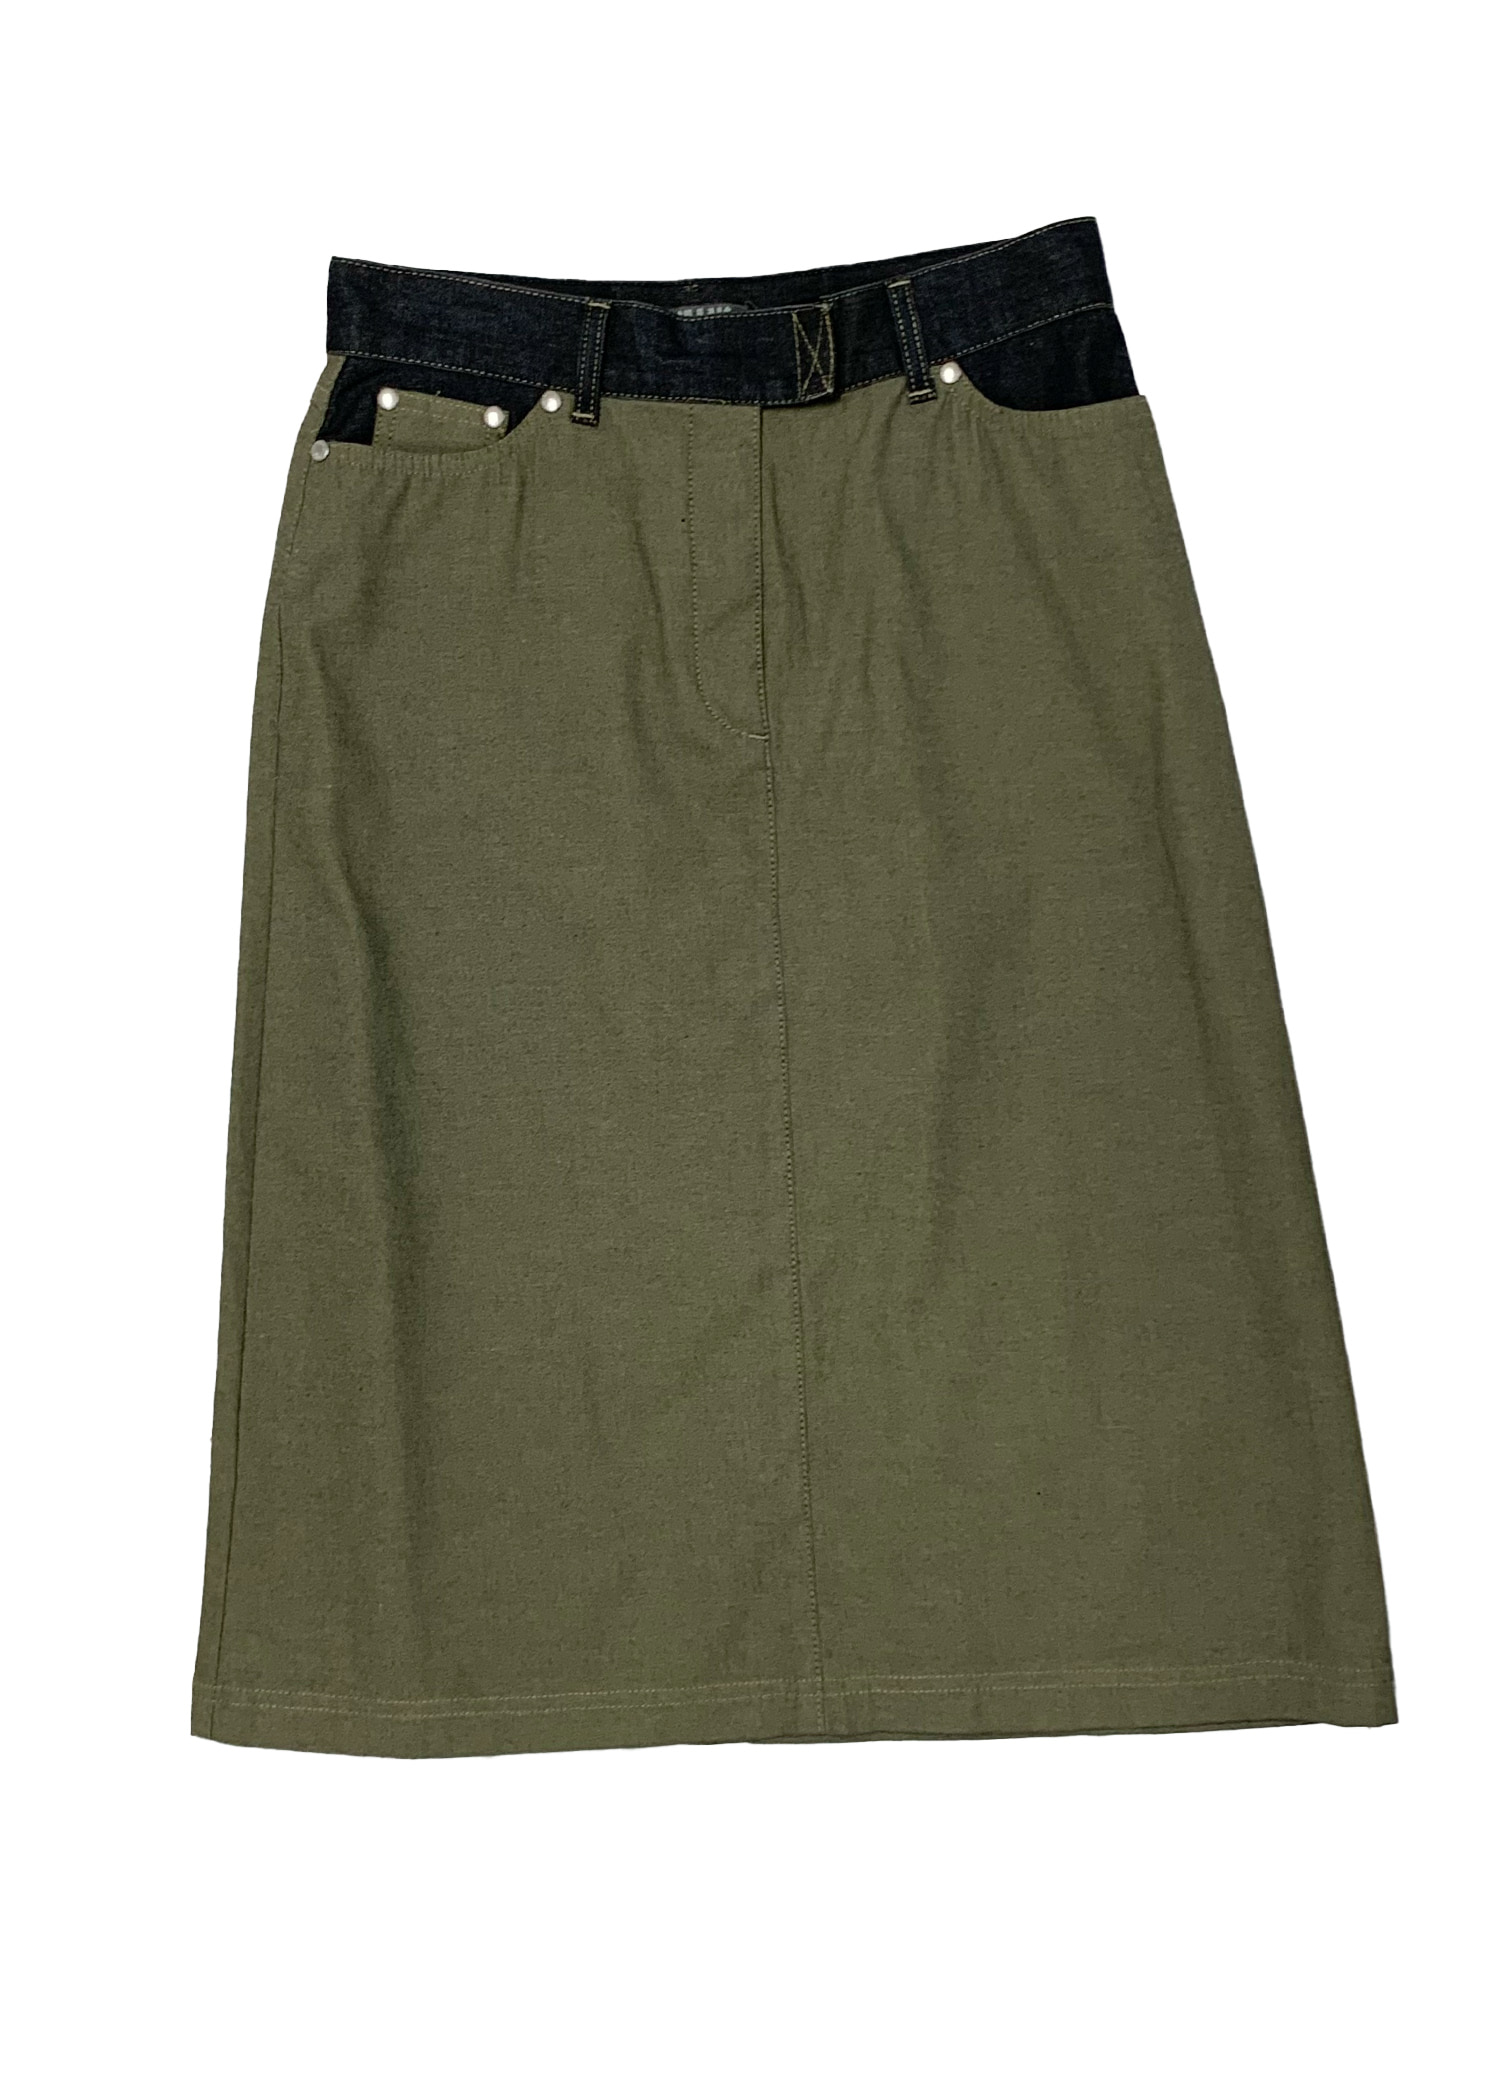 selcet vintage : two-tone skirts